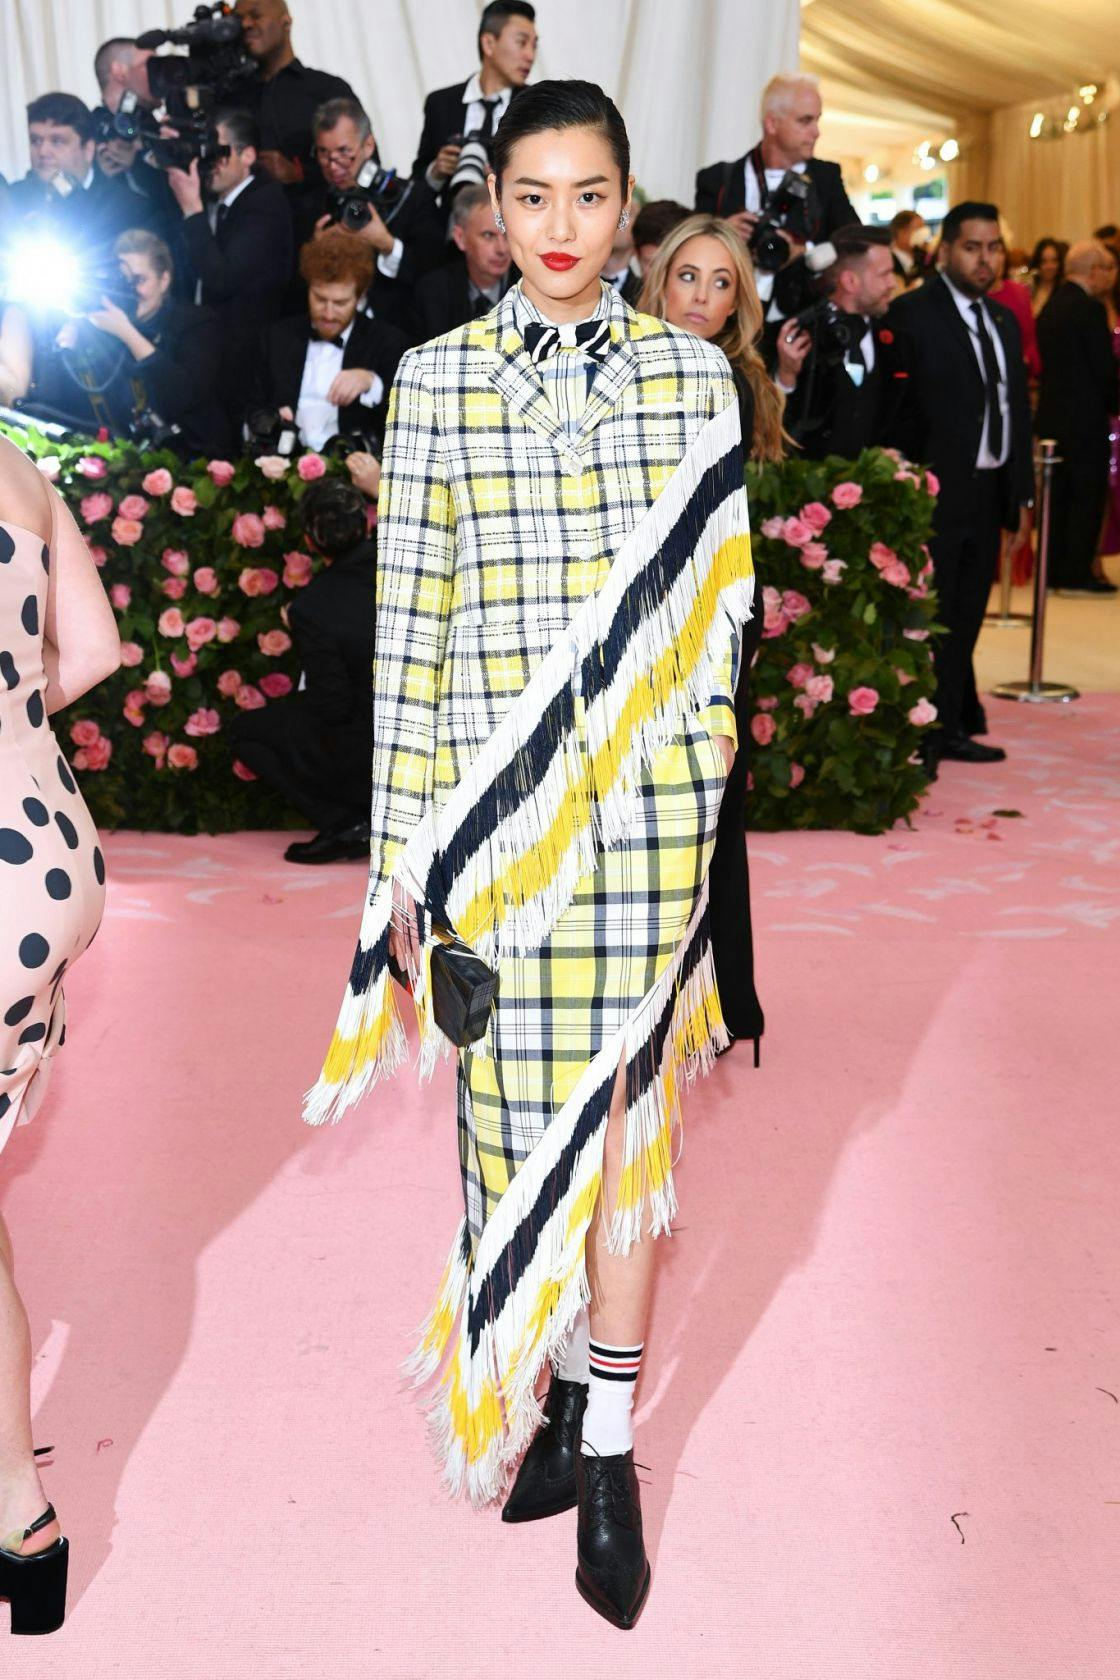 Met Gala 2019: the best red carpet looks from the night